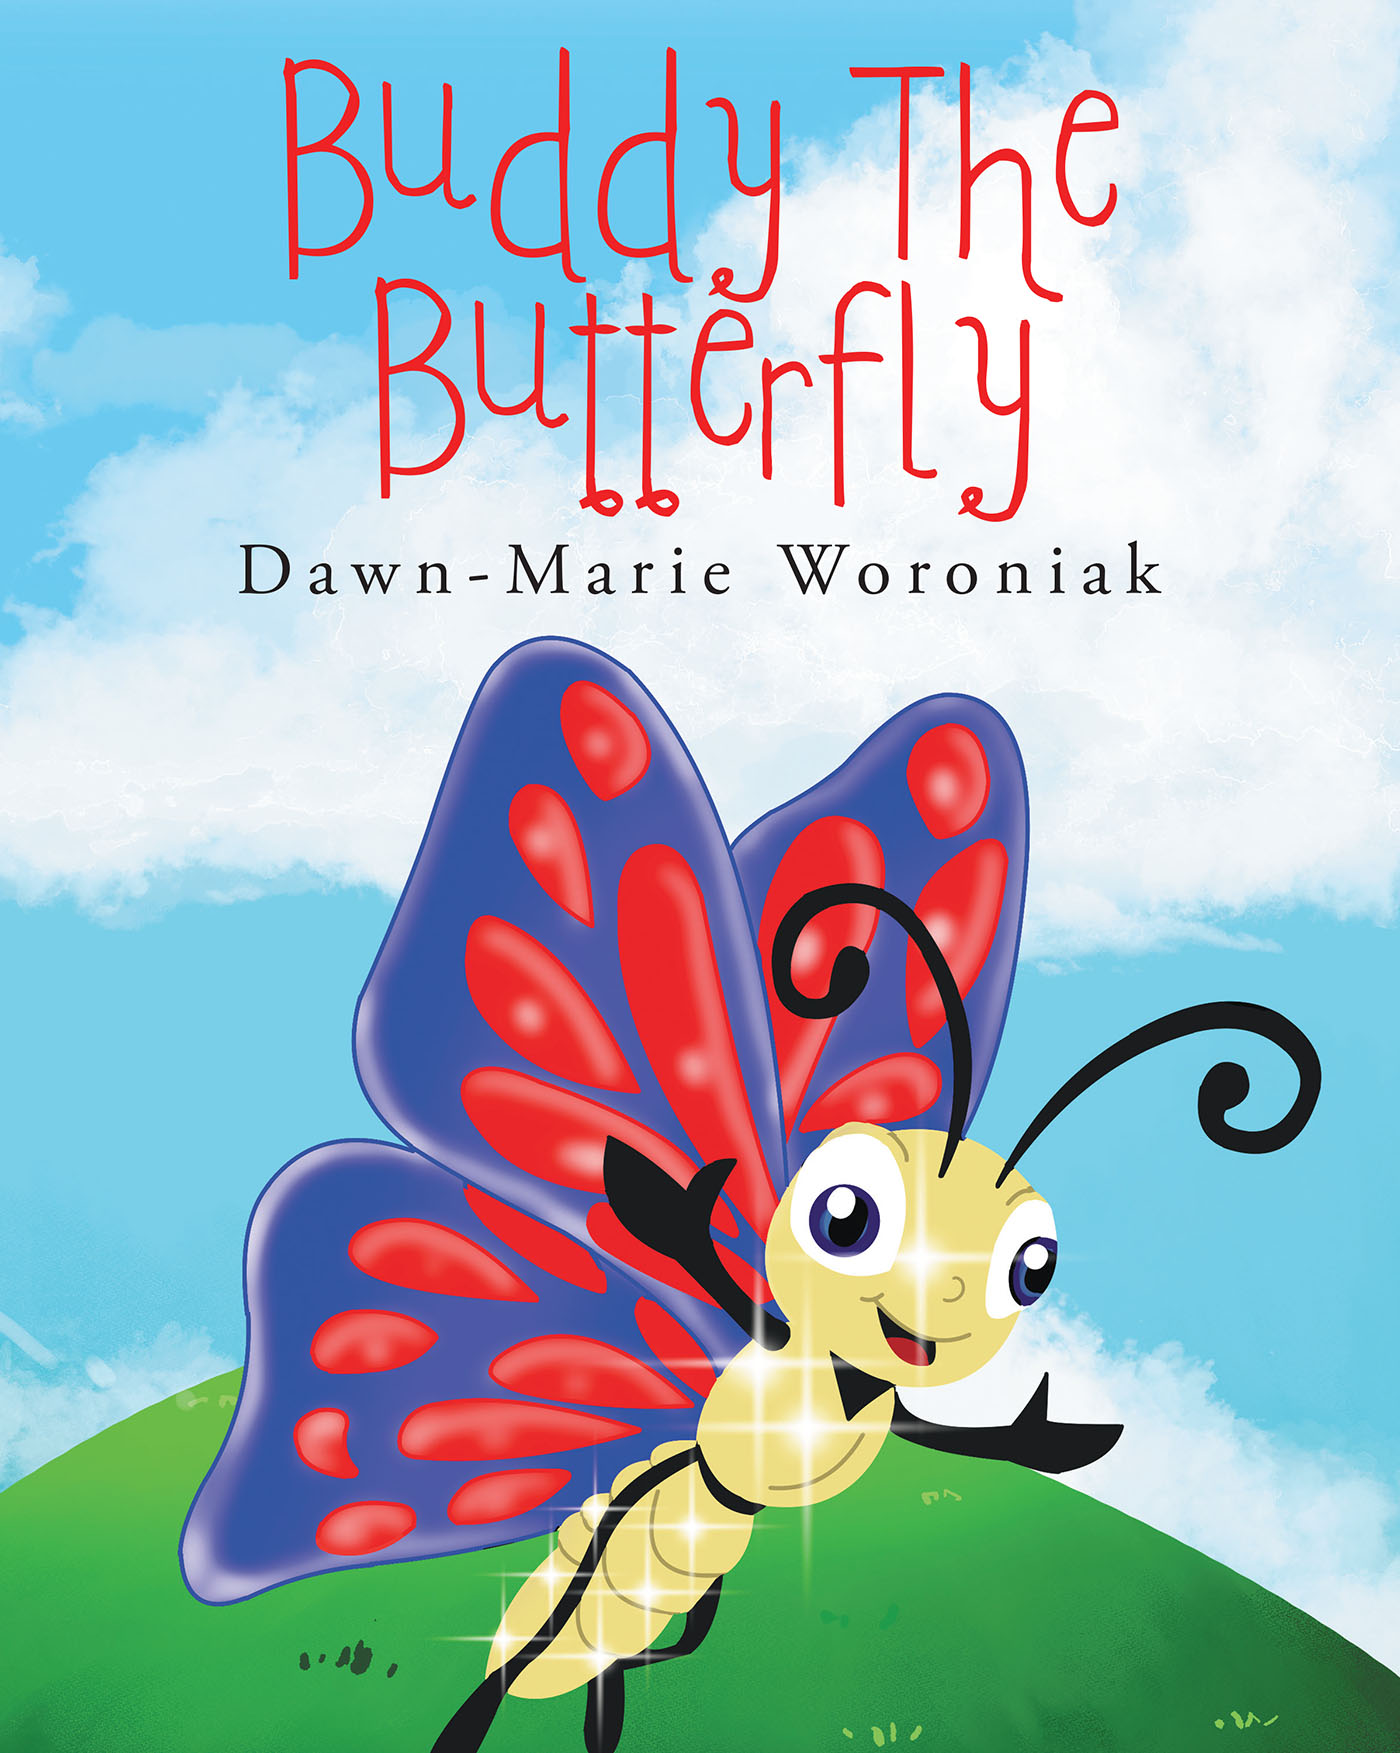 Dawn-Marie Woroniak’s Newly Released "Buddy the Butterfly" is a Delightful Tale of Valuable Lessons of Faith for Upcoming Generations